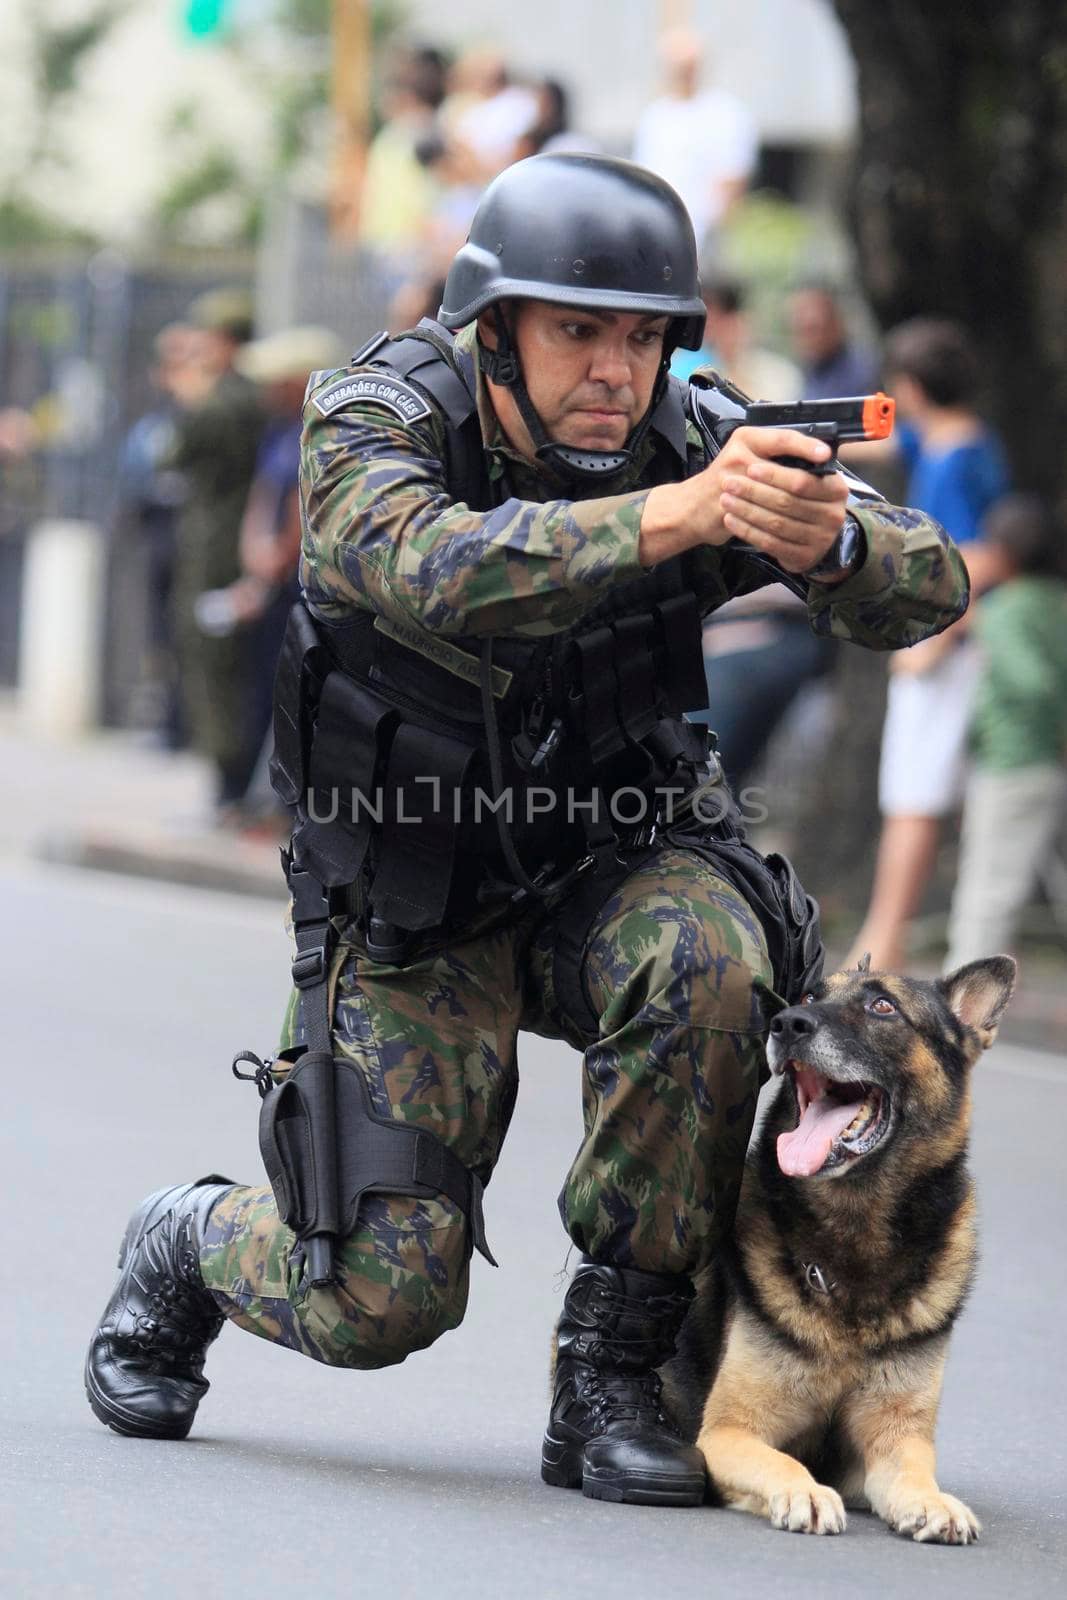 salvador, bahia / brazil - september 7, 2014: dog follows orders from the army soldier during a military parade to commemorate the day of Brazil's independence. The parade takes place in the city of Salvador.